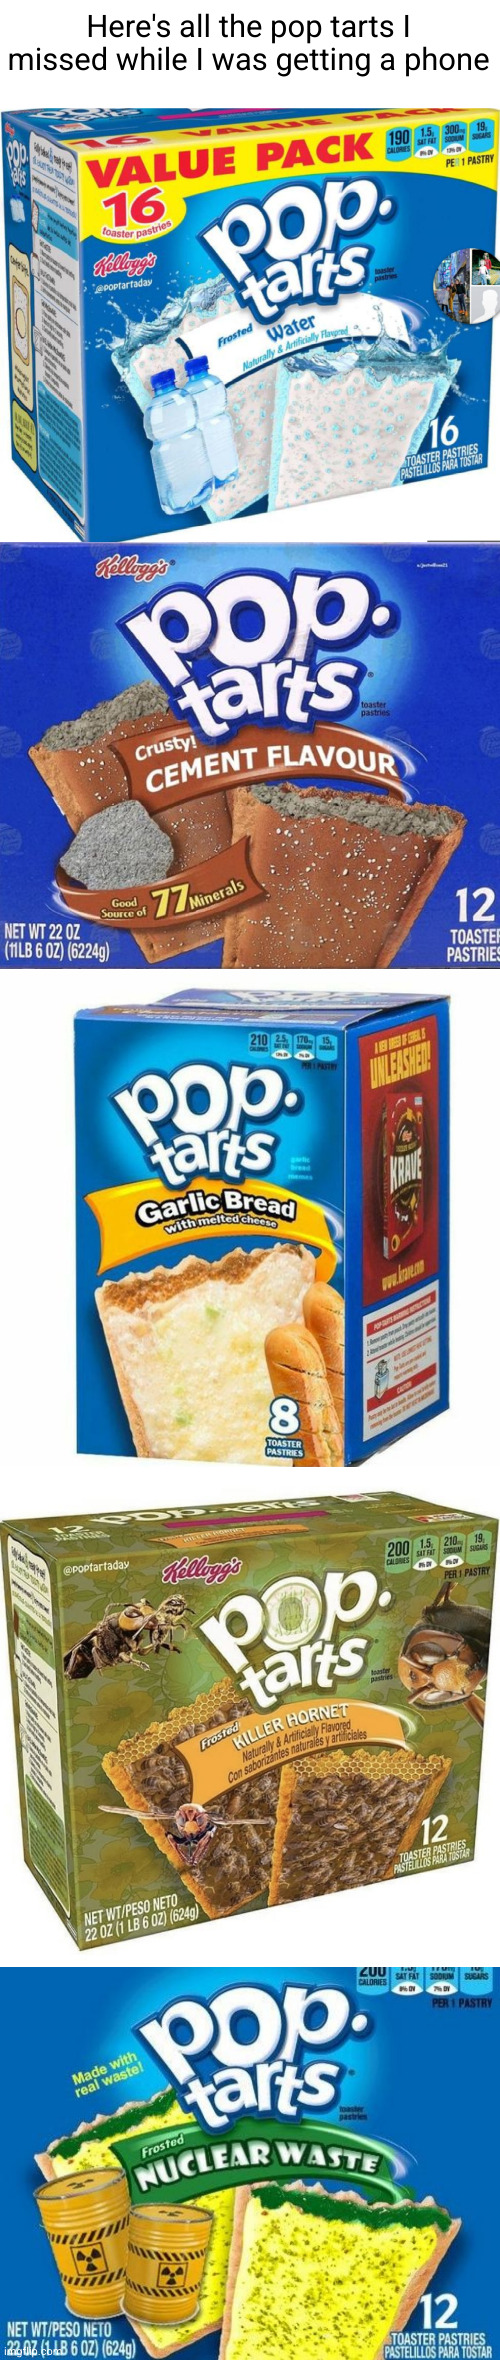 Meme #2,629 | Here's all the pop tarts I missed while I was getting a phone | image tagged in pop tarts,lunch,msmg,eat it,cursed,yummy yum yum | made w/ Imgflip meme maker